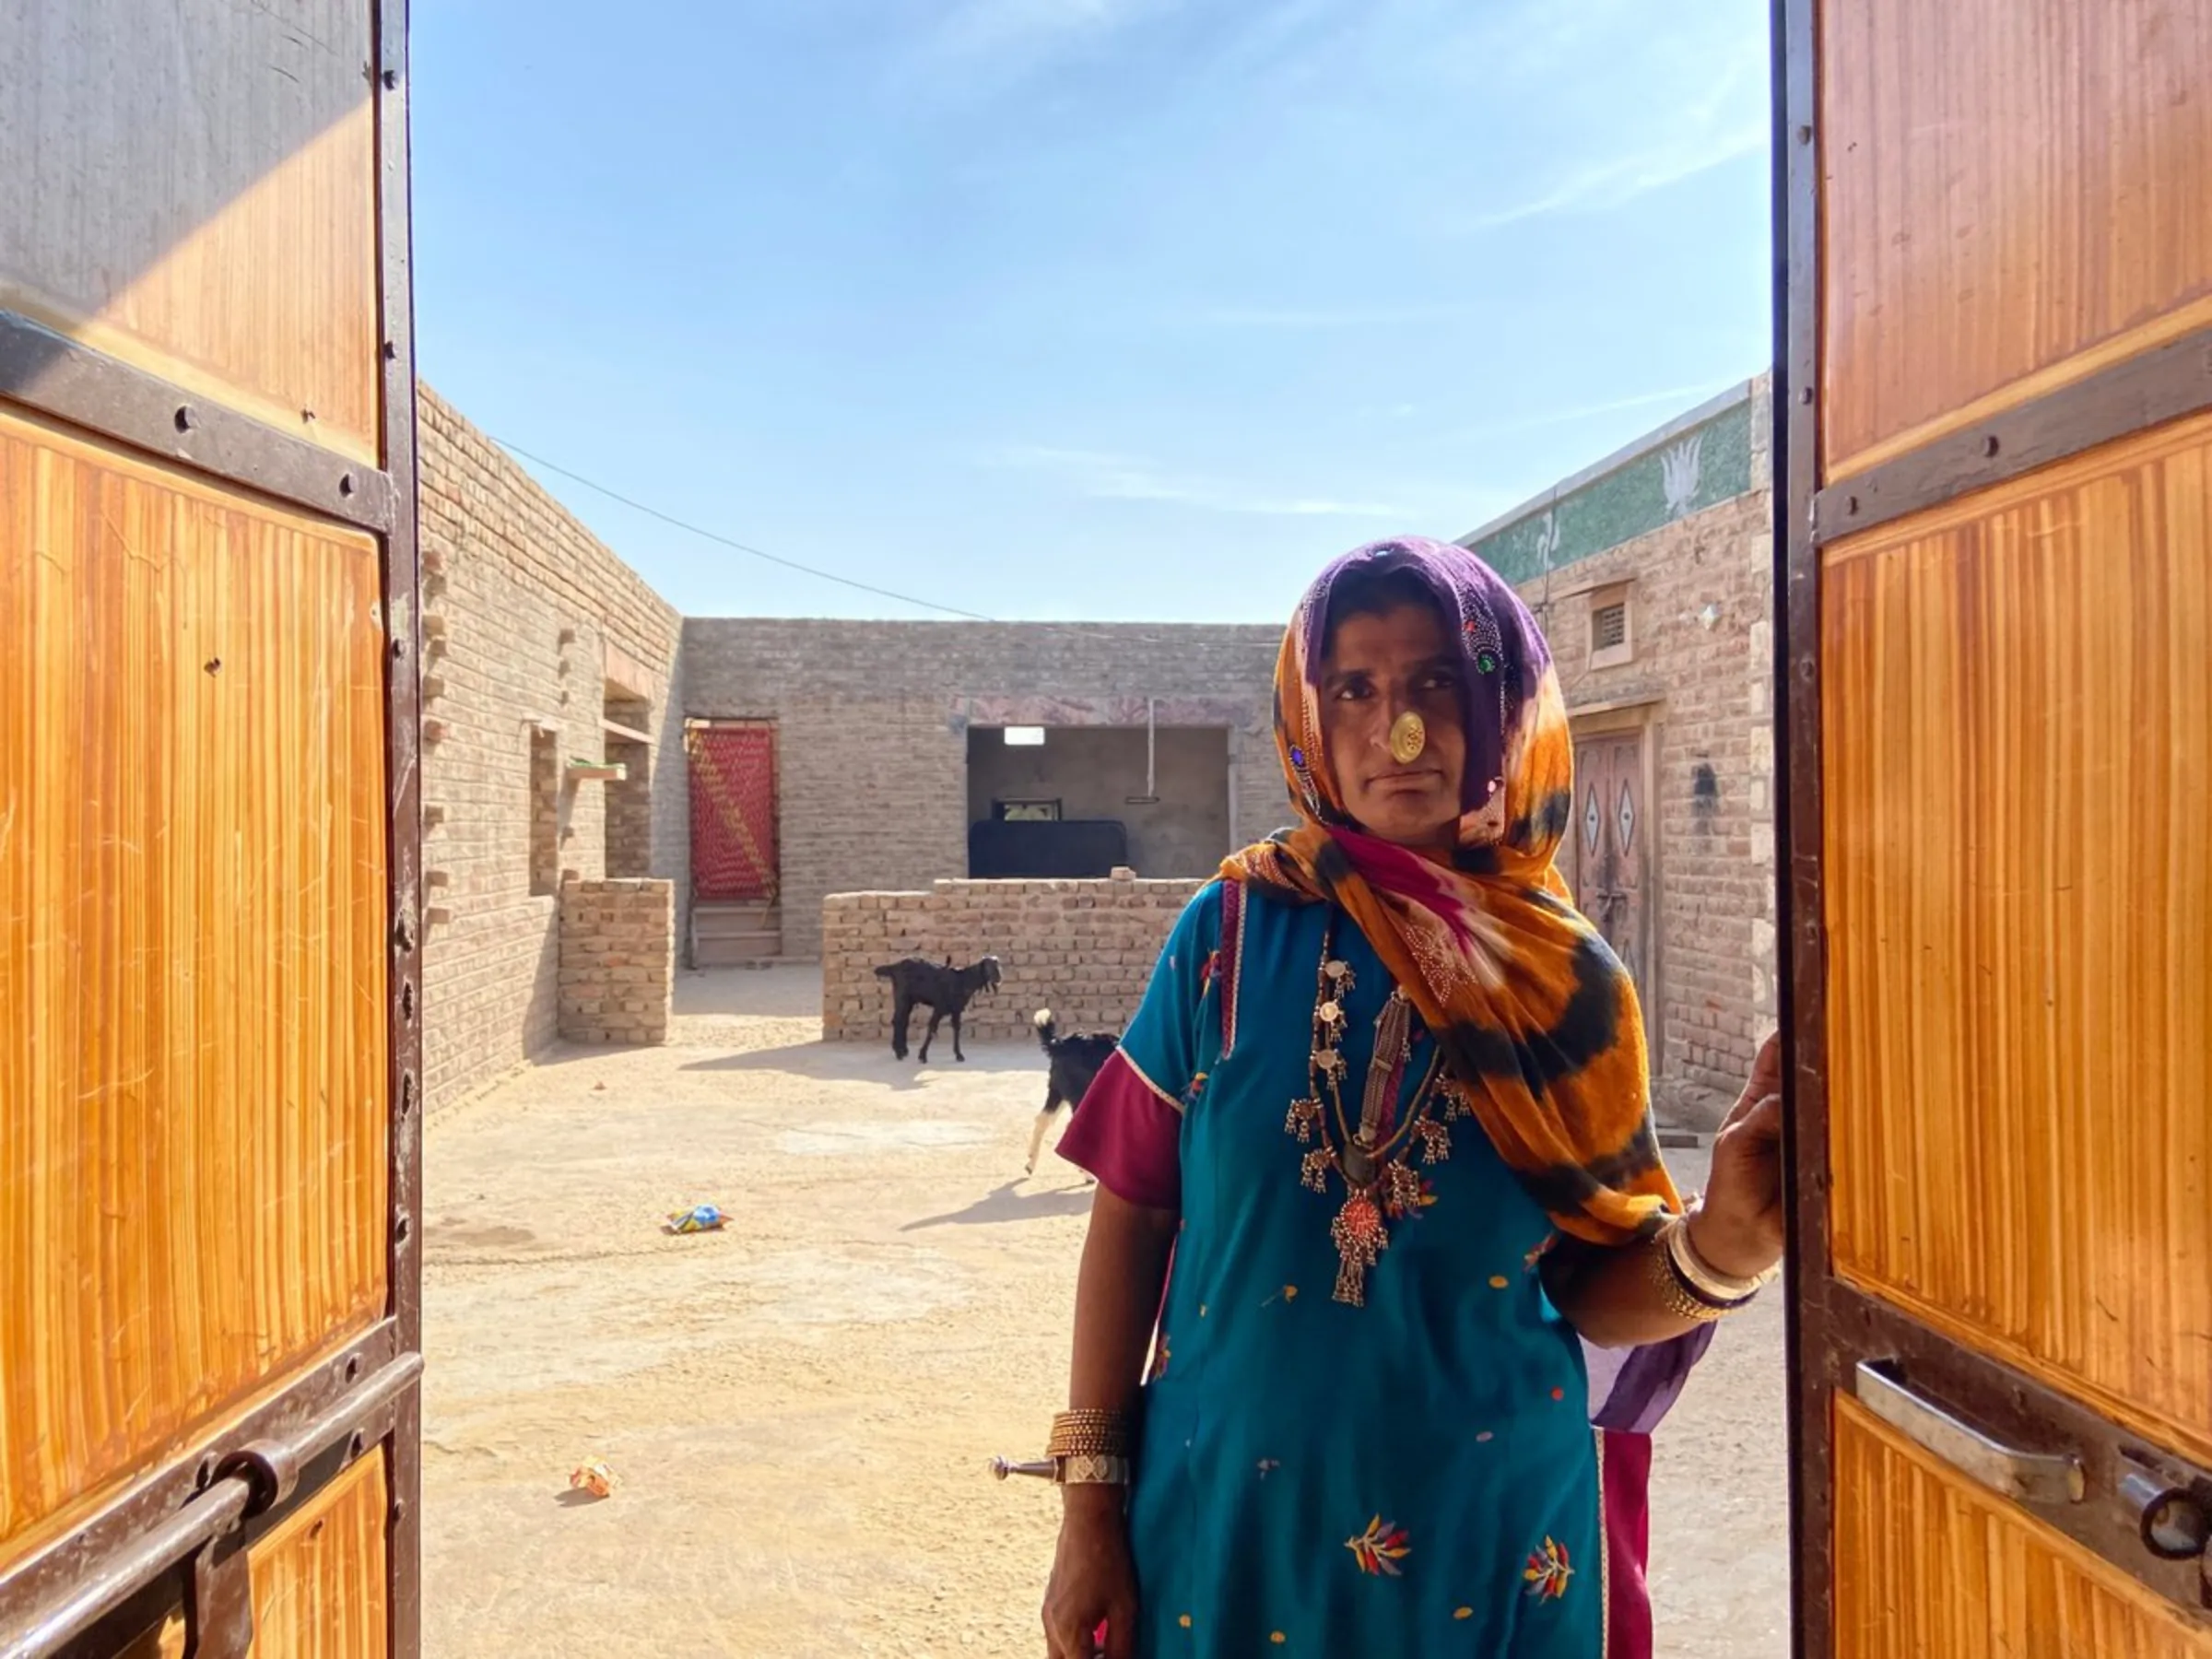 Dadda Khatoon poses for a picture at the door of her house in Bhadla village, Rajasthan, India, December 11, 2021